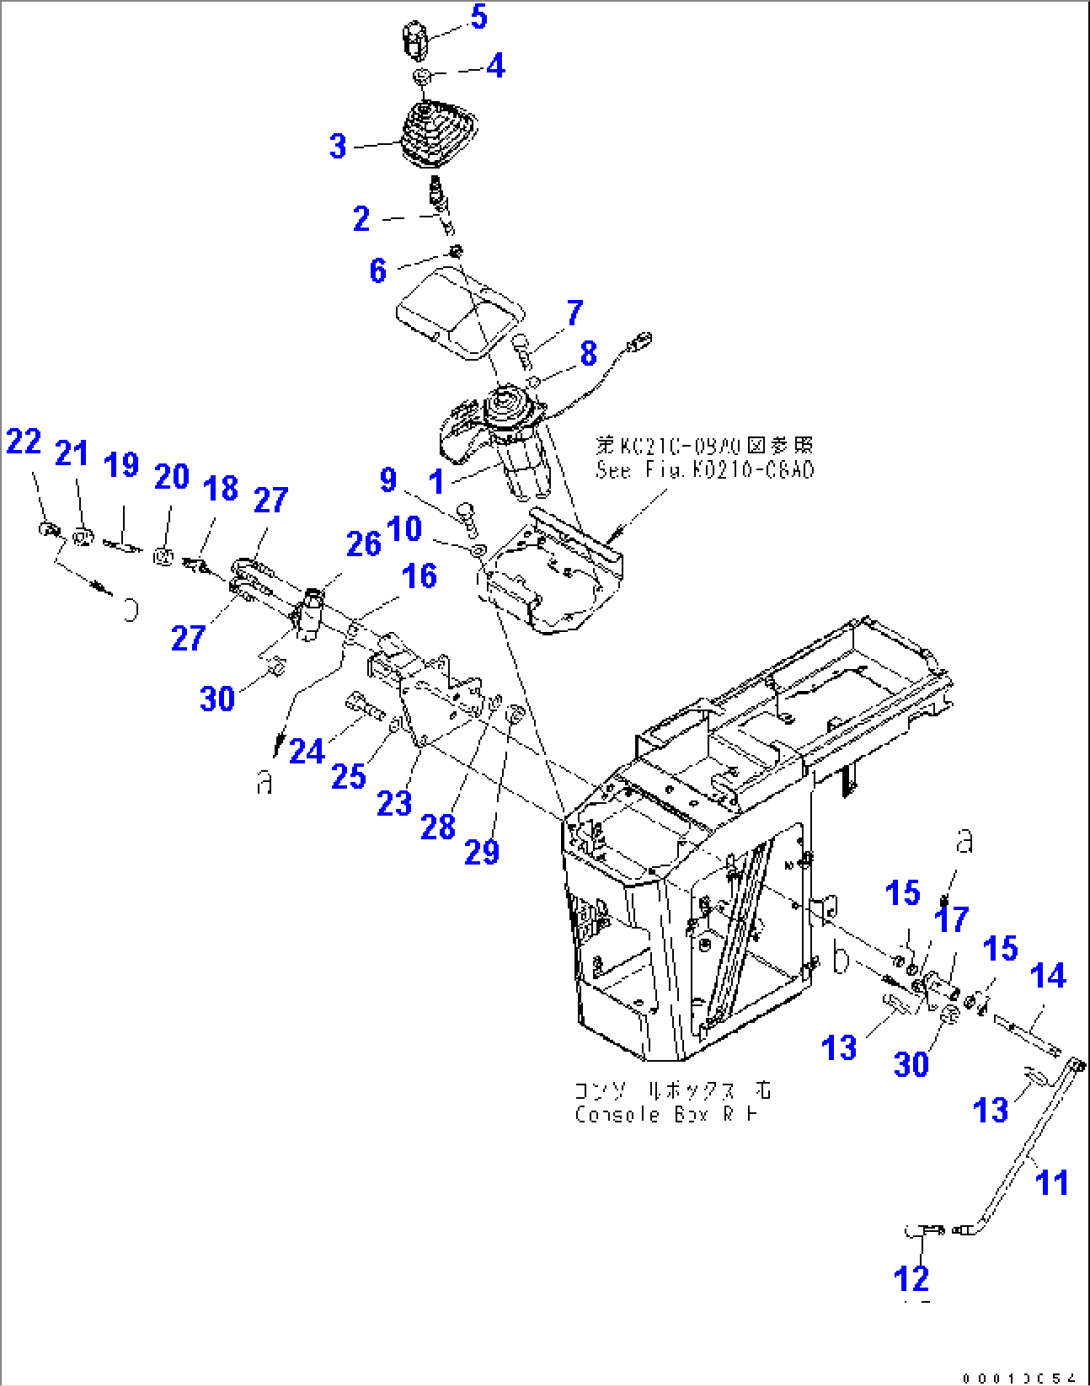 FLOOR (LOADER CONTROL) (1/2) (P.P.C VALVE AND LEVER)